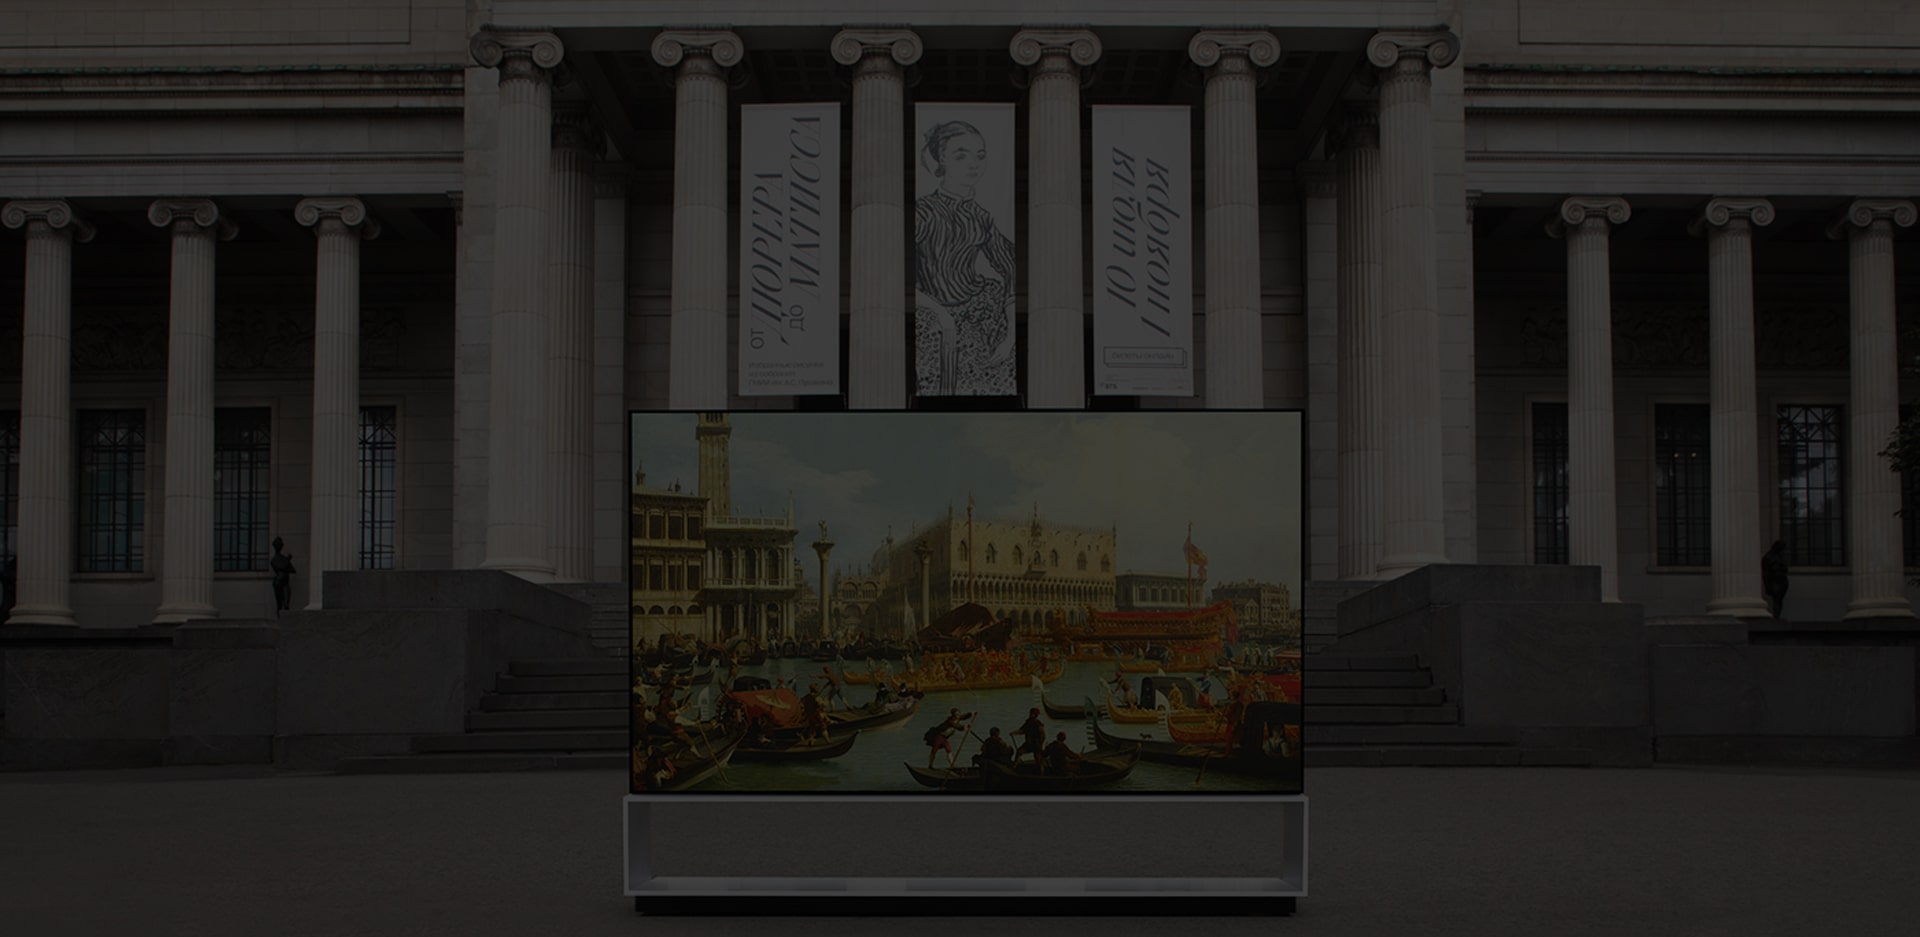 LG SIGNATURE OLED 8K TV is laid in front of Pushkin State Museum of Fine Arts.